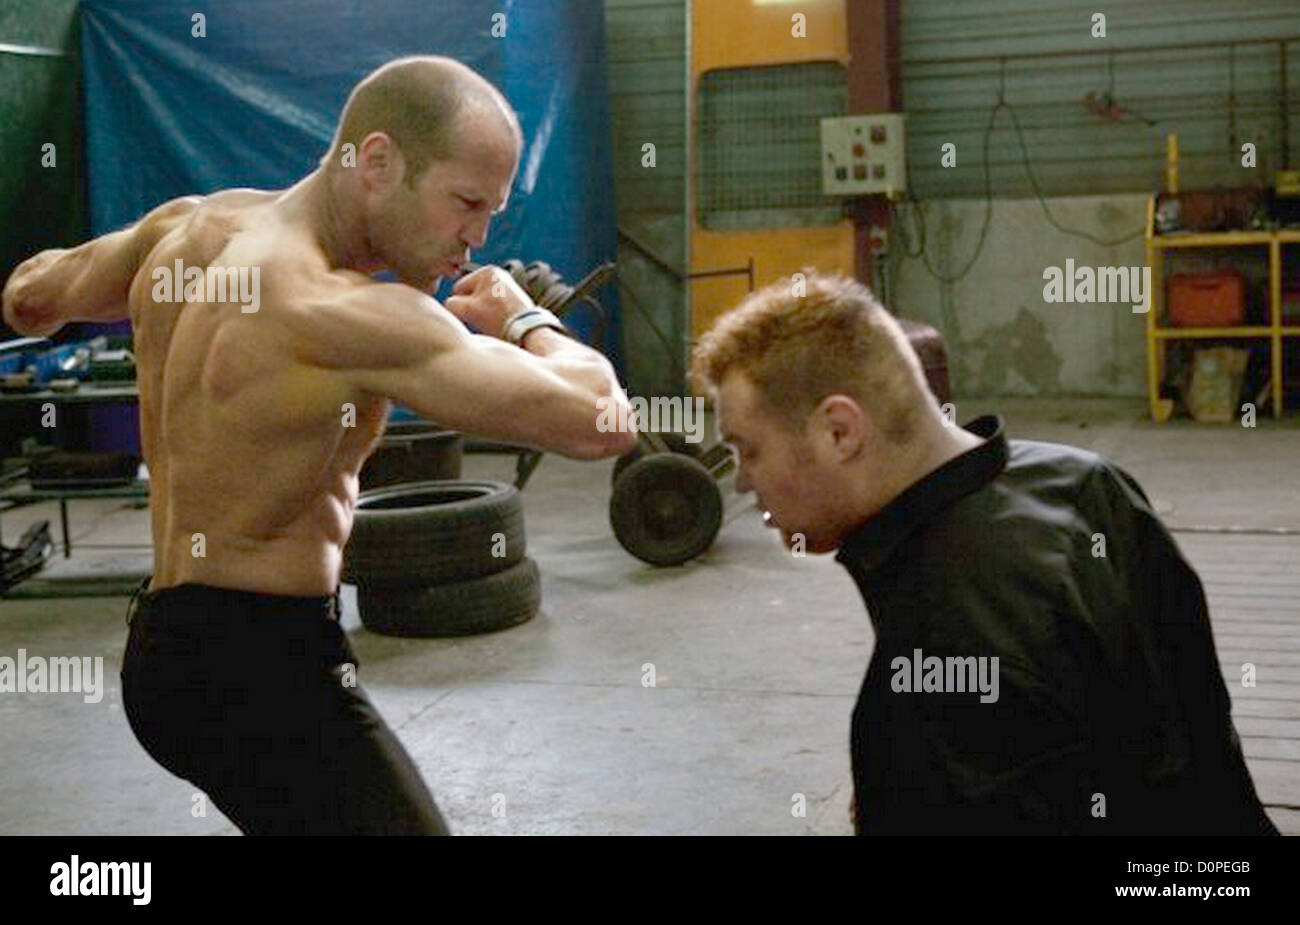 TRANSPORTER 3 - 2008 Lions Gate Entertainment film with Jason Statham at left Stock Photo